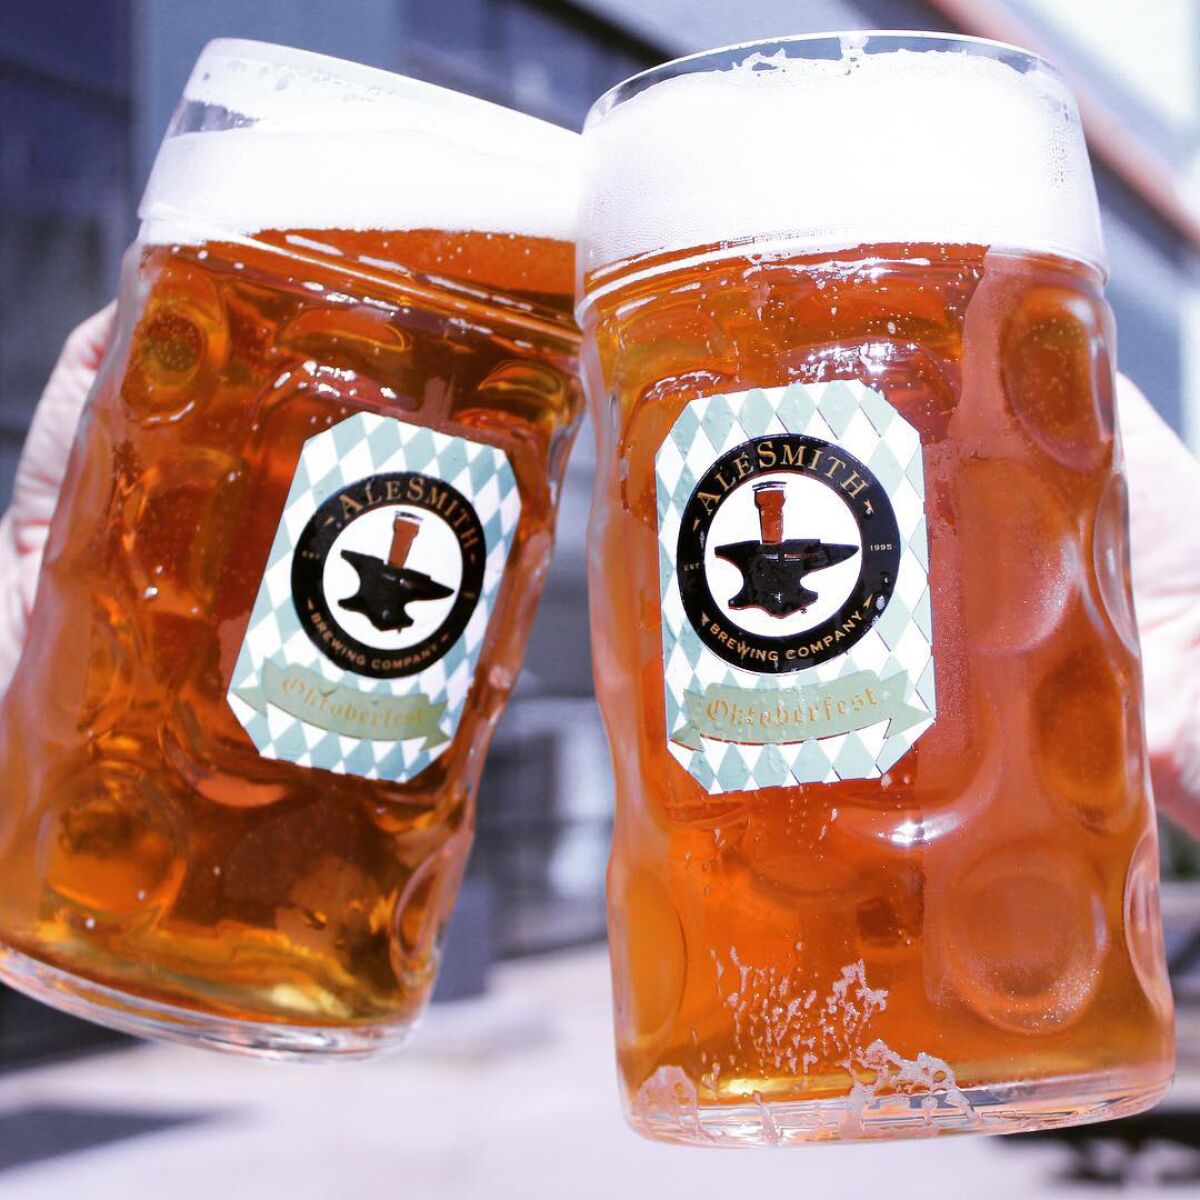 AleSmith will offer its Oktoberfest beers in commemorative stein glasses from Sept. 24-27